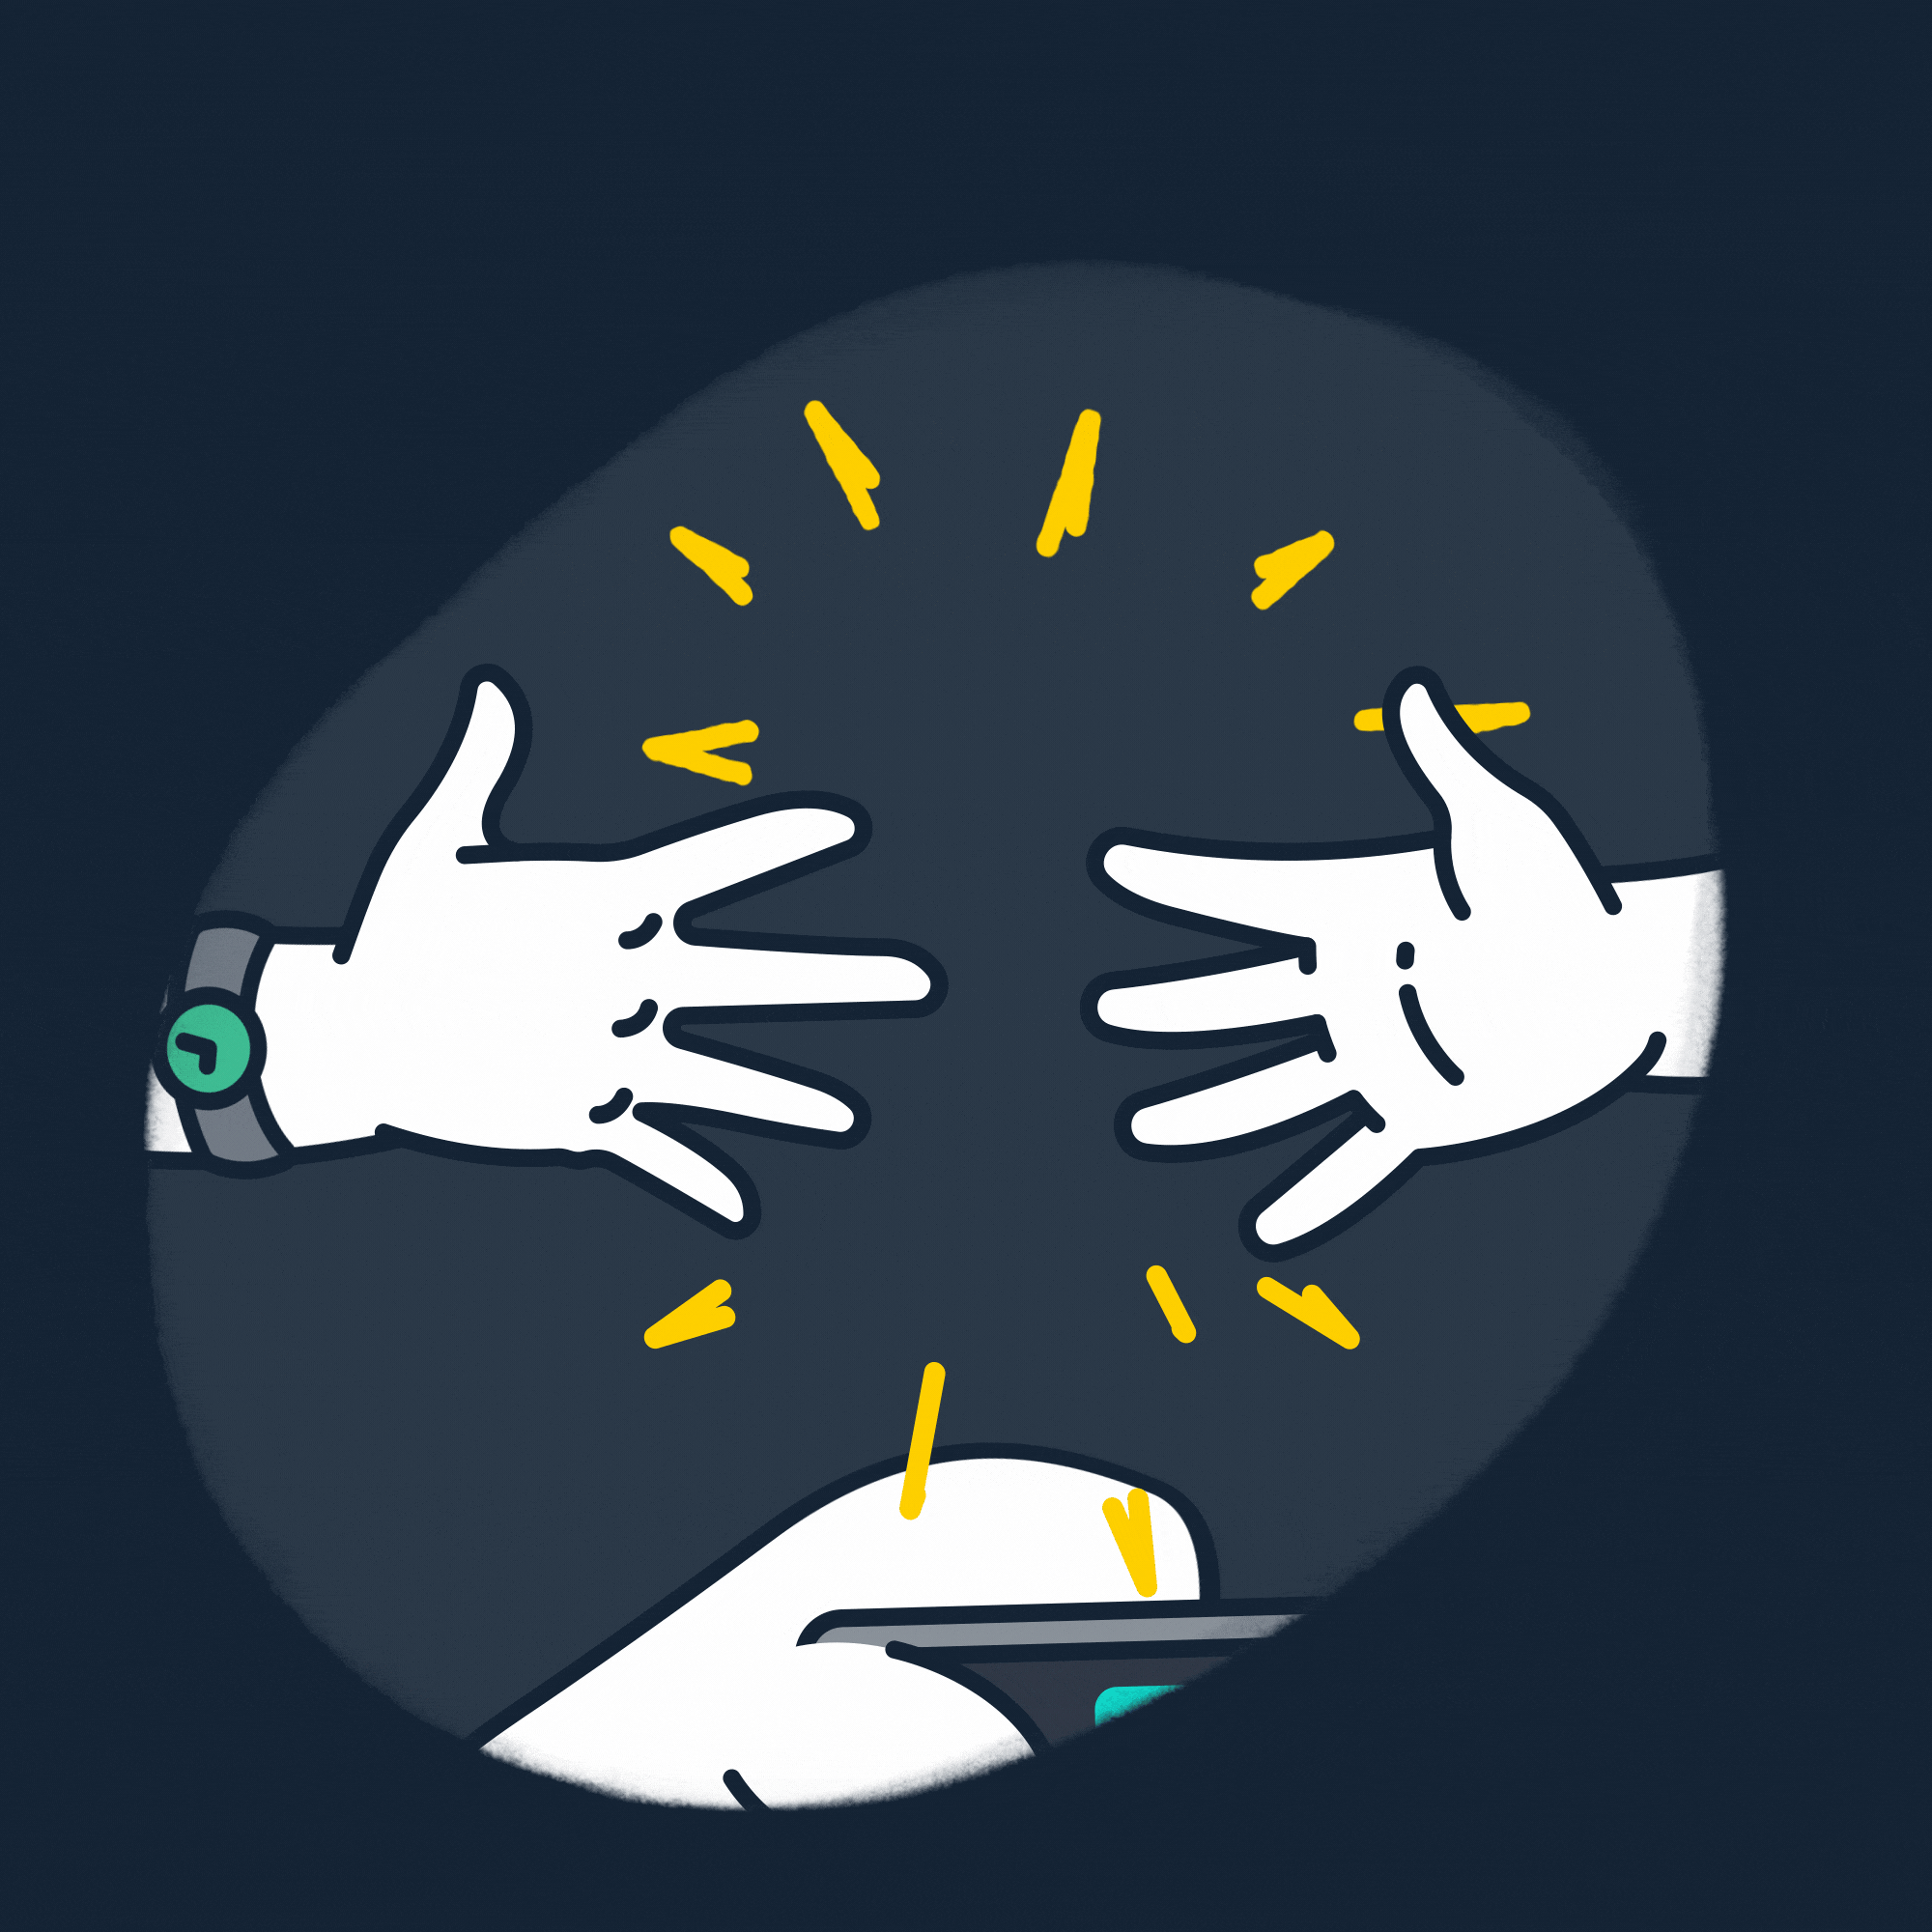 Animated illustration of sending invite to someone and then a fist bump